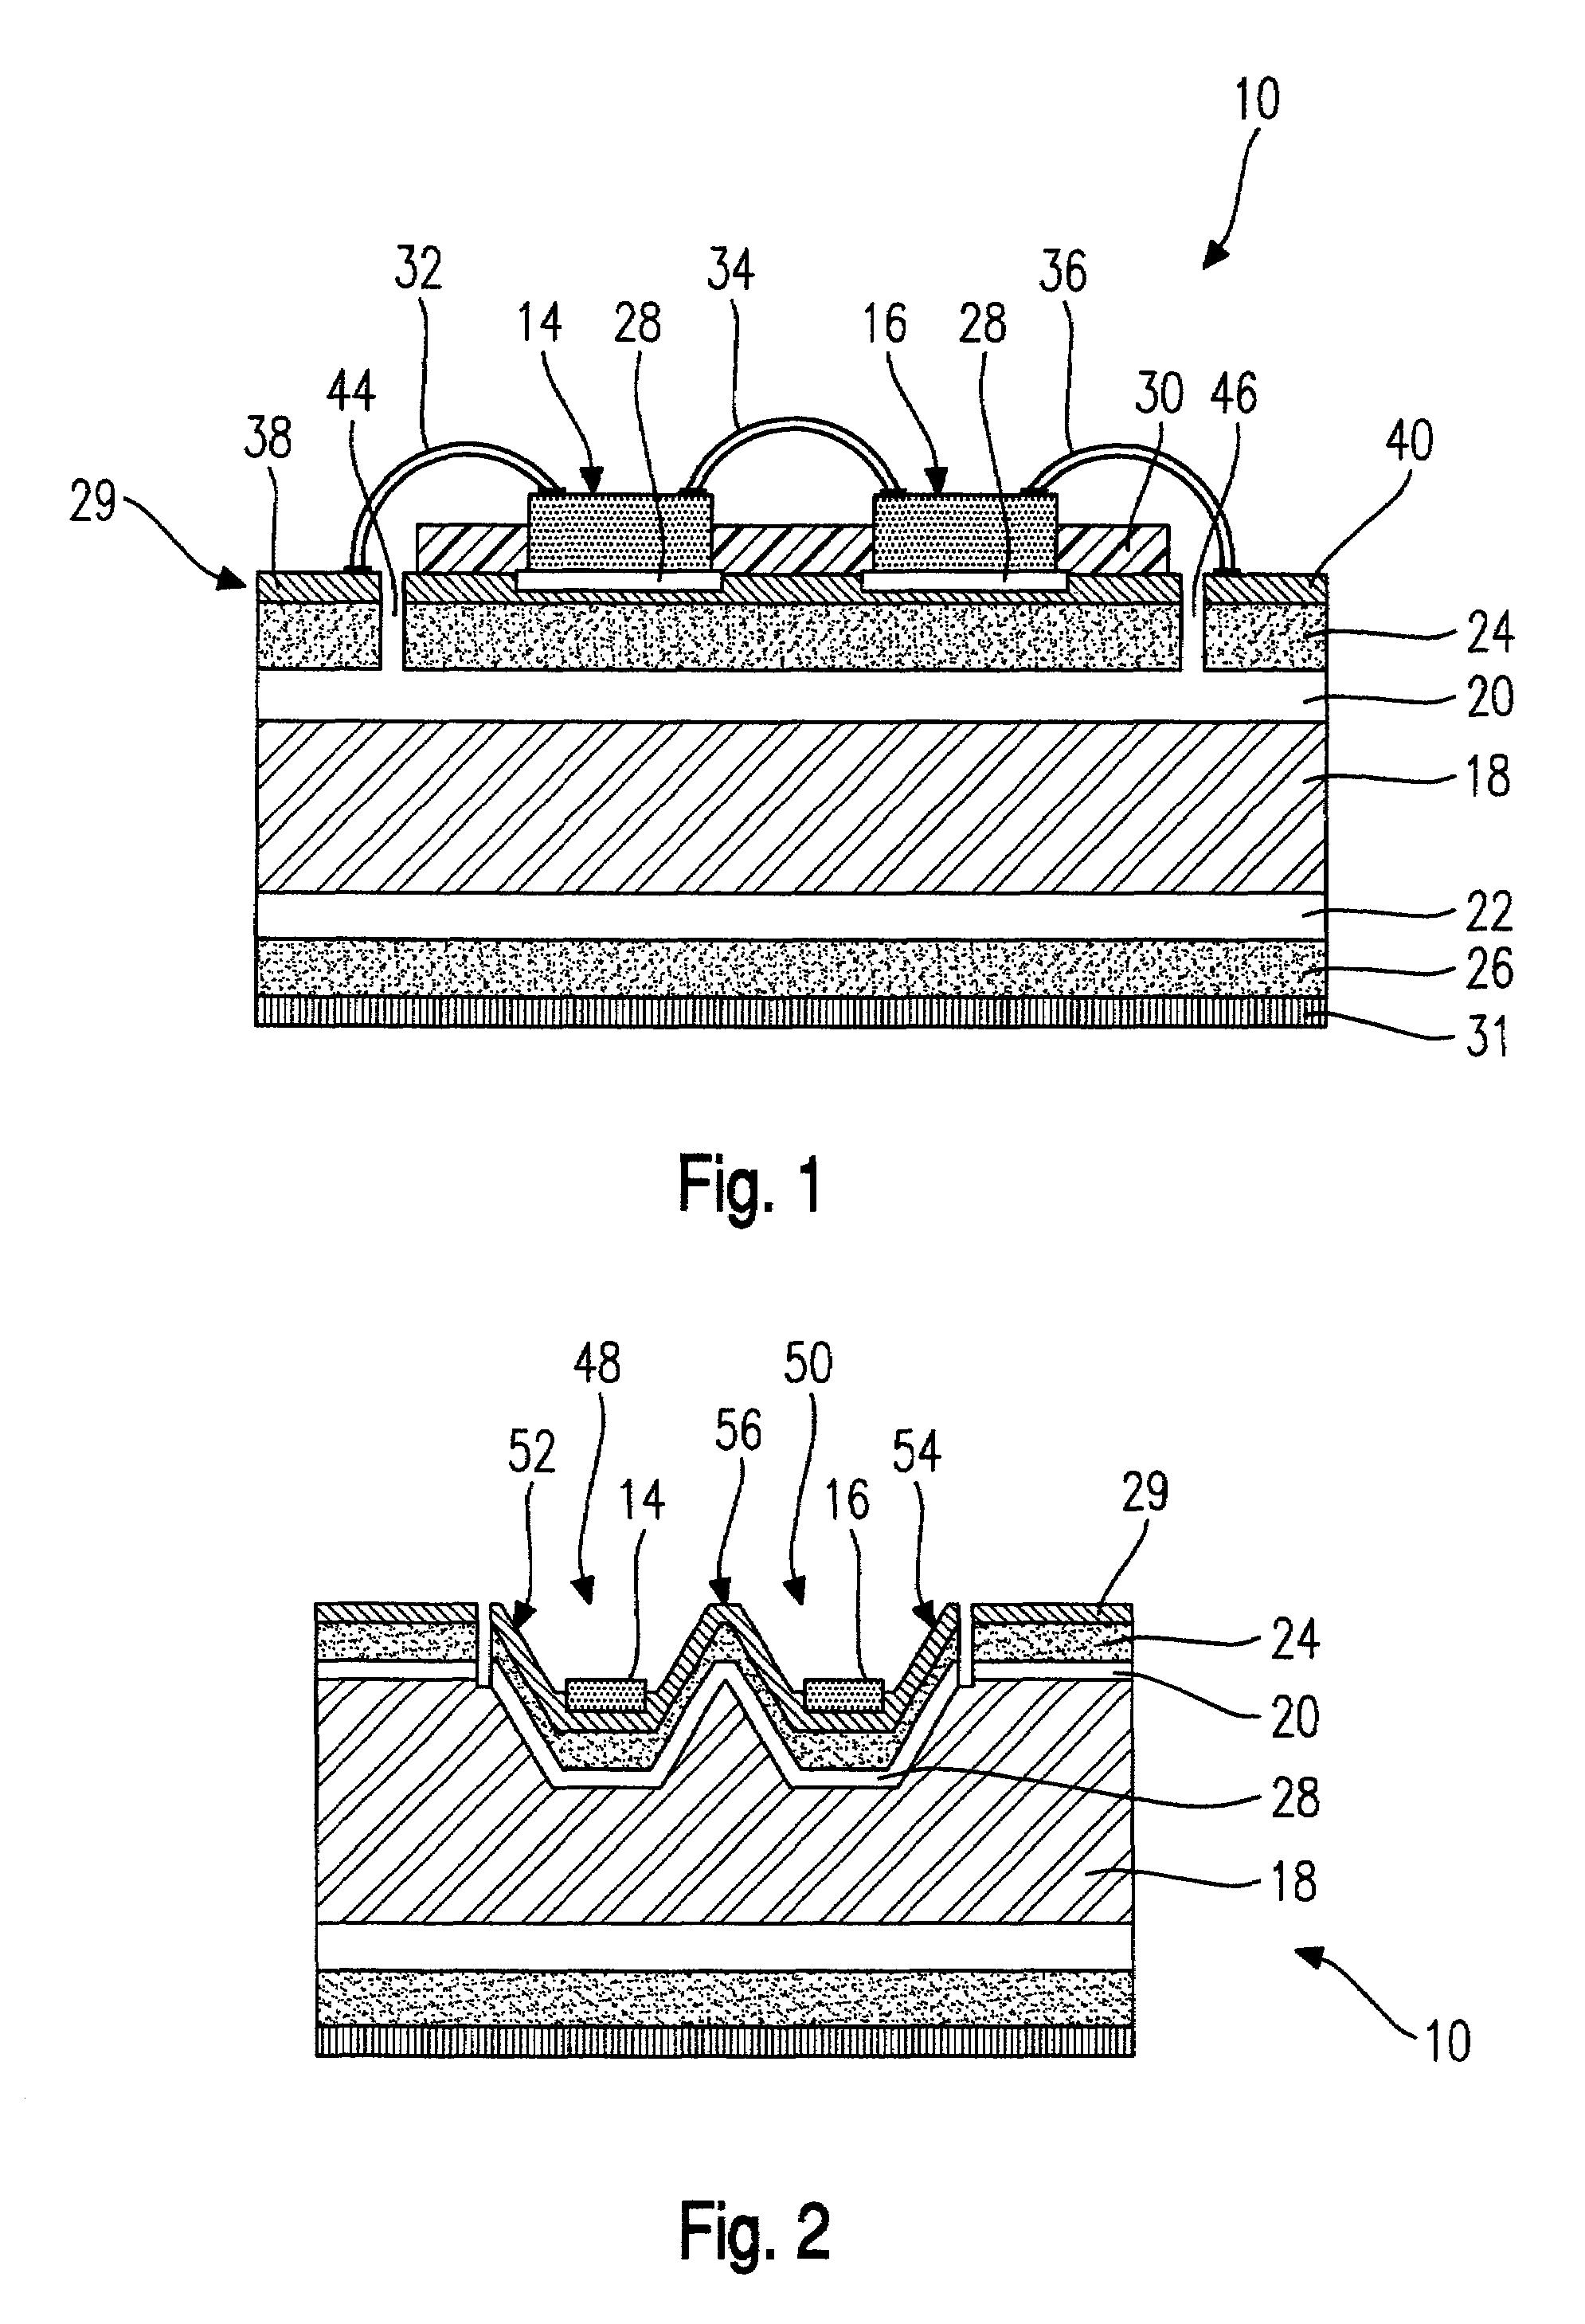 Lighting apparatus for guiding light onto a light polymerizable piece to effect hardening thereof